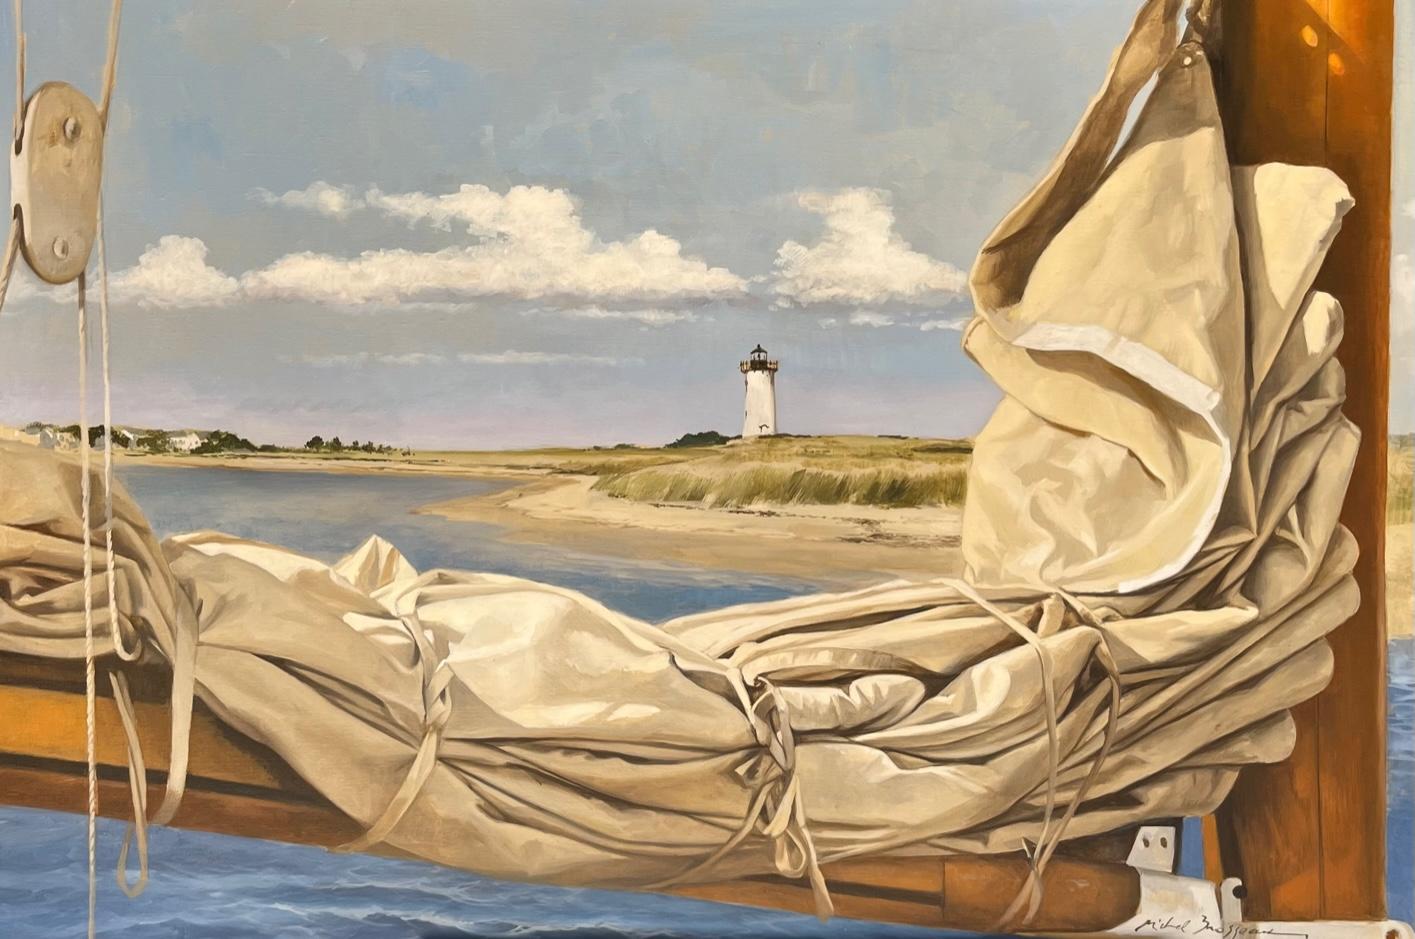 Michel Brosseau Still-Life Painting - "At Rest in the Harbor" oil painting of a folded sail with lighthouse and beach